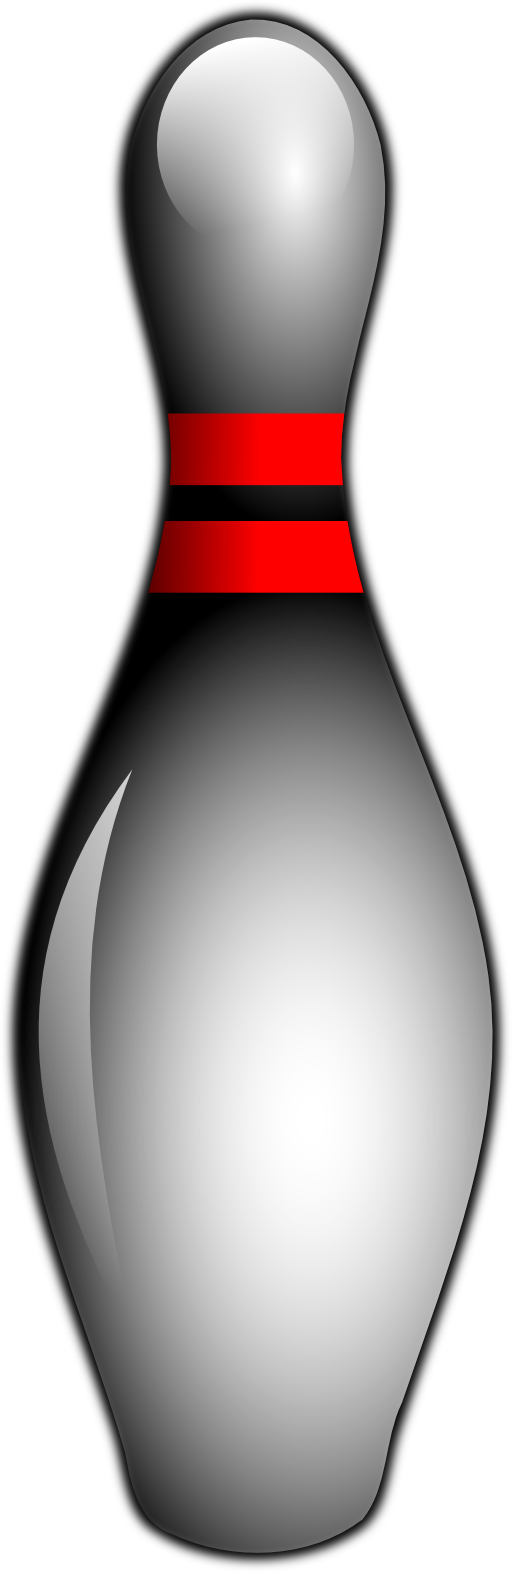 Bowling Pin Picture 